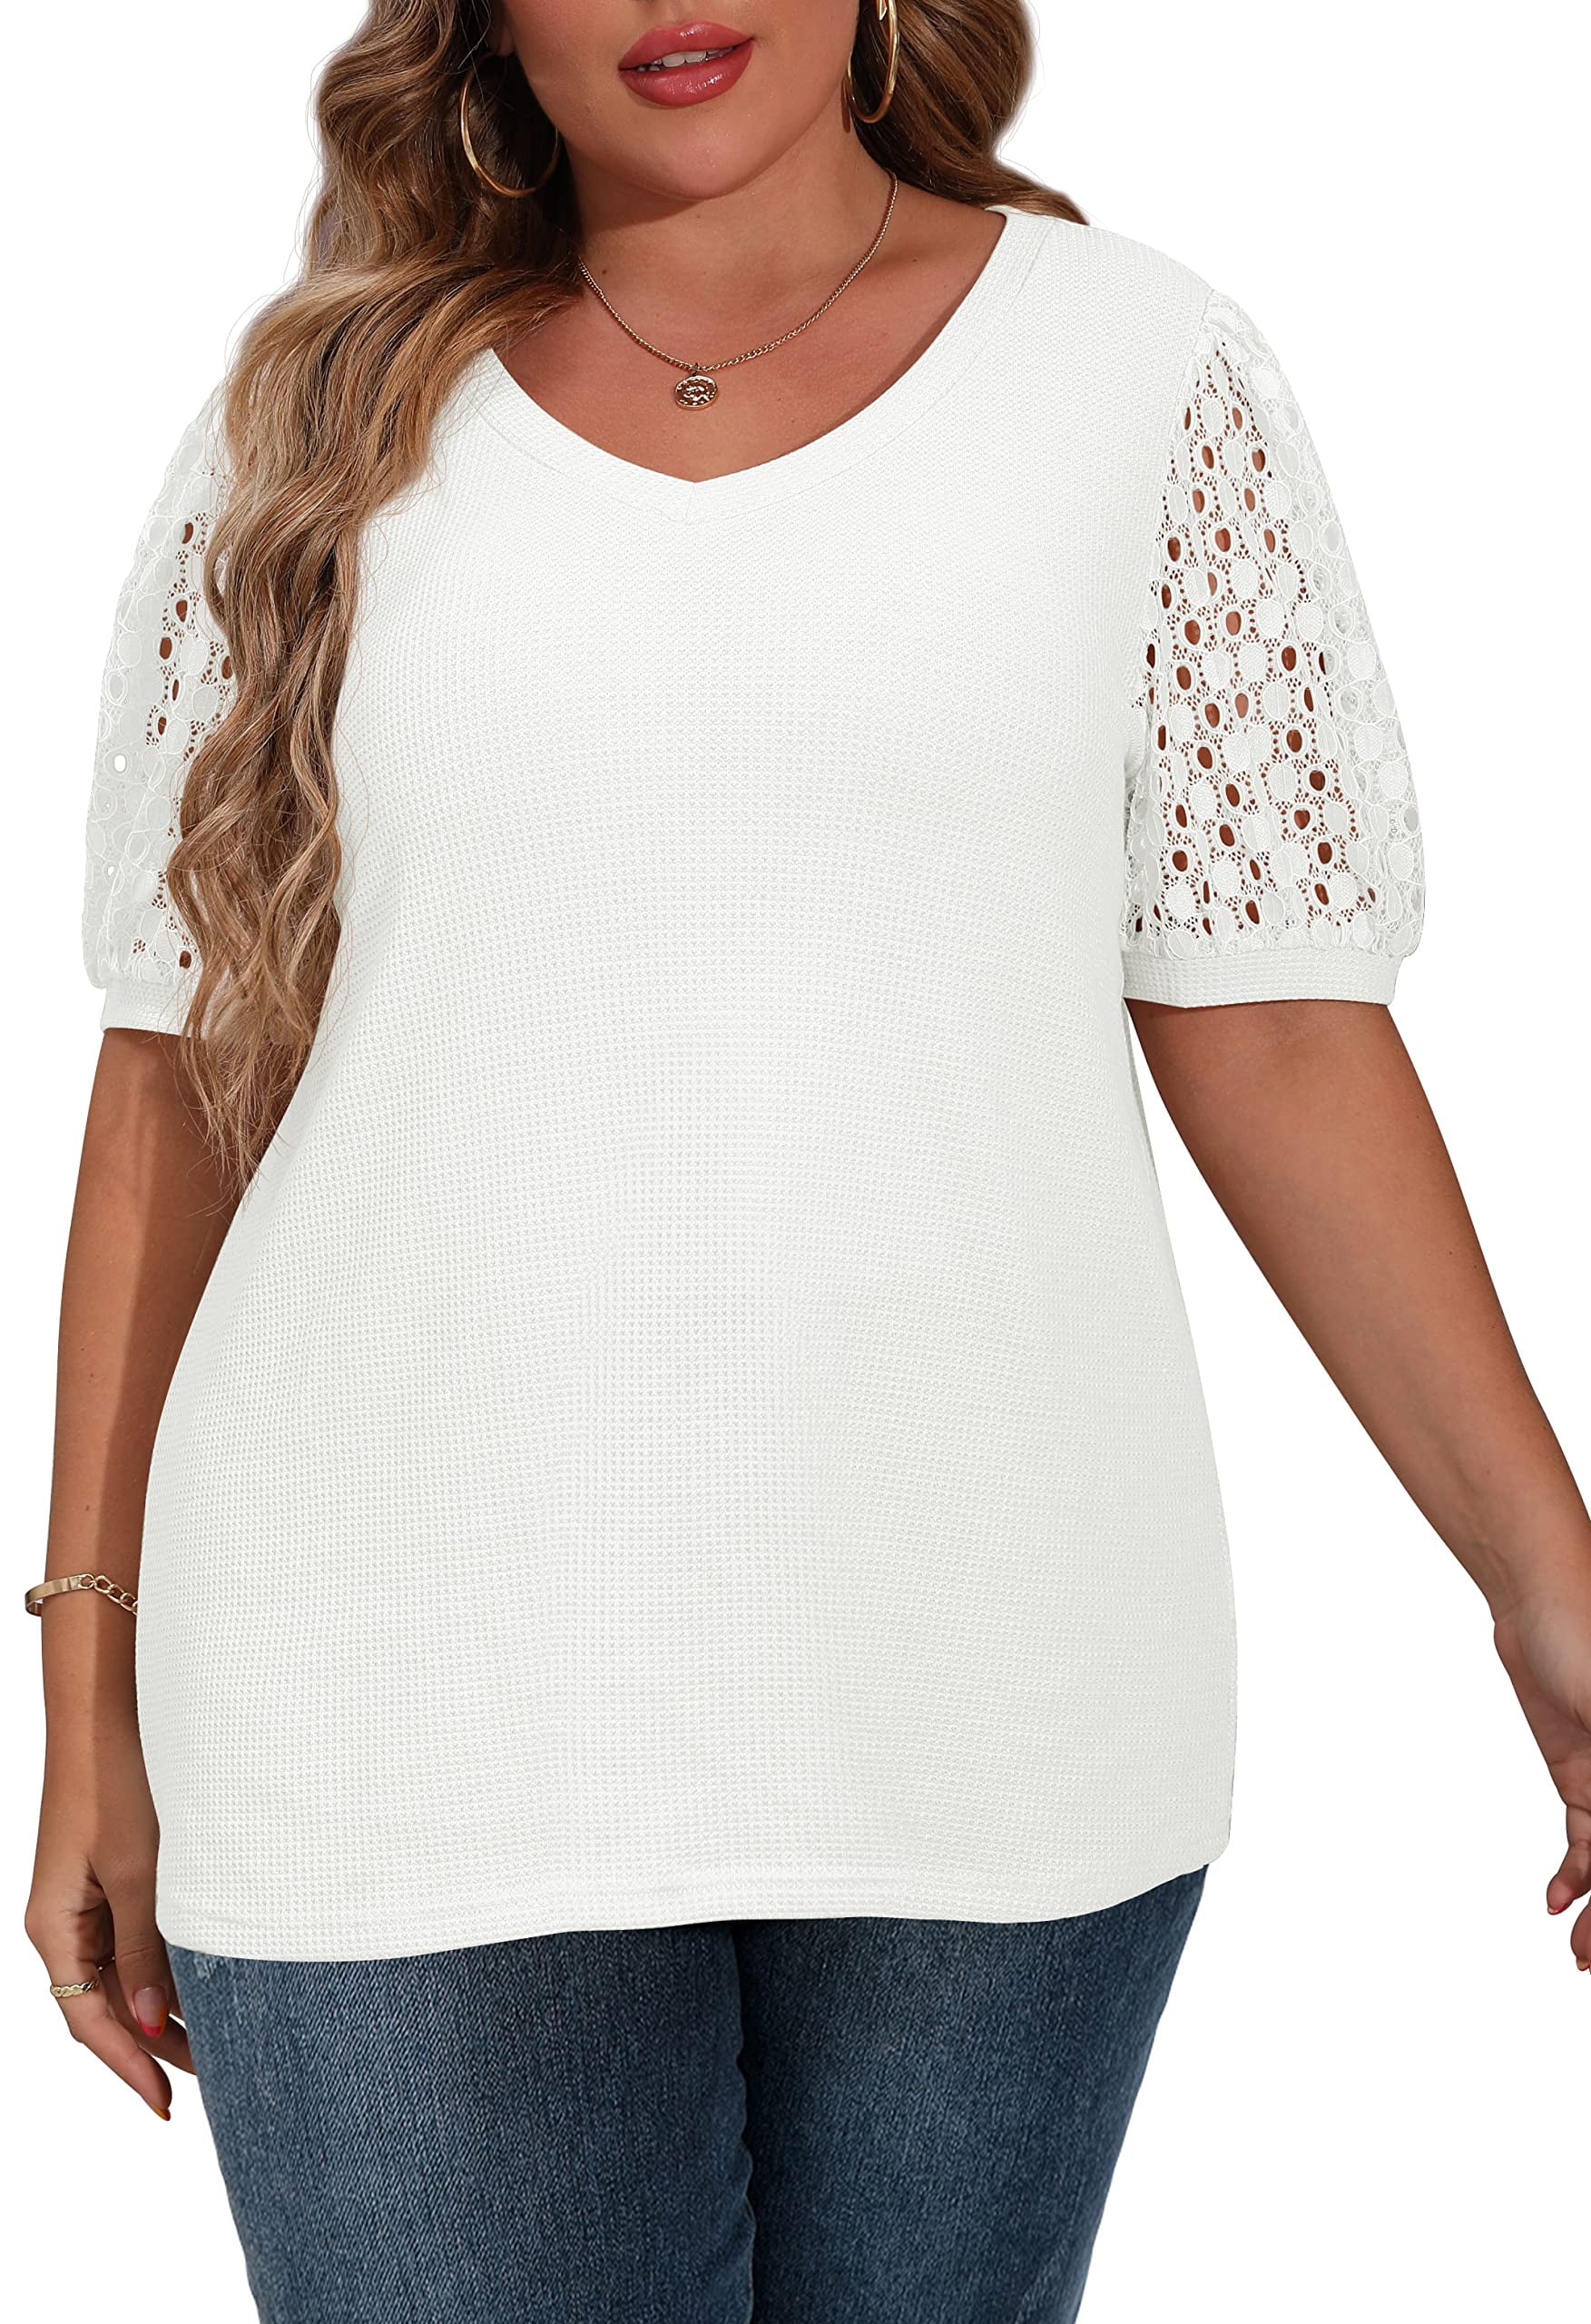 JWD Plus Size Tops For Women Summer Blouse Waffle Knit Short Lace Sleeve  Shirts Plus Size Womens Clothes 